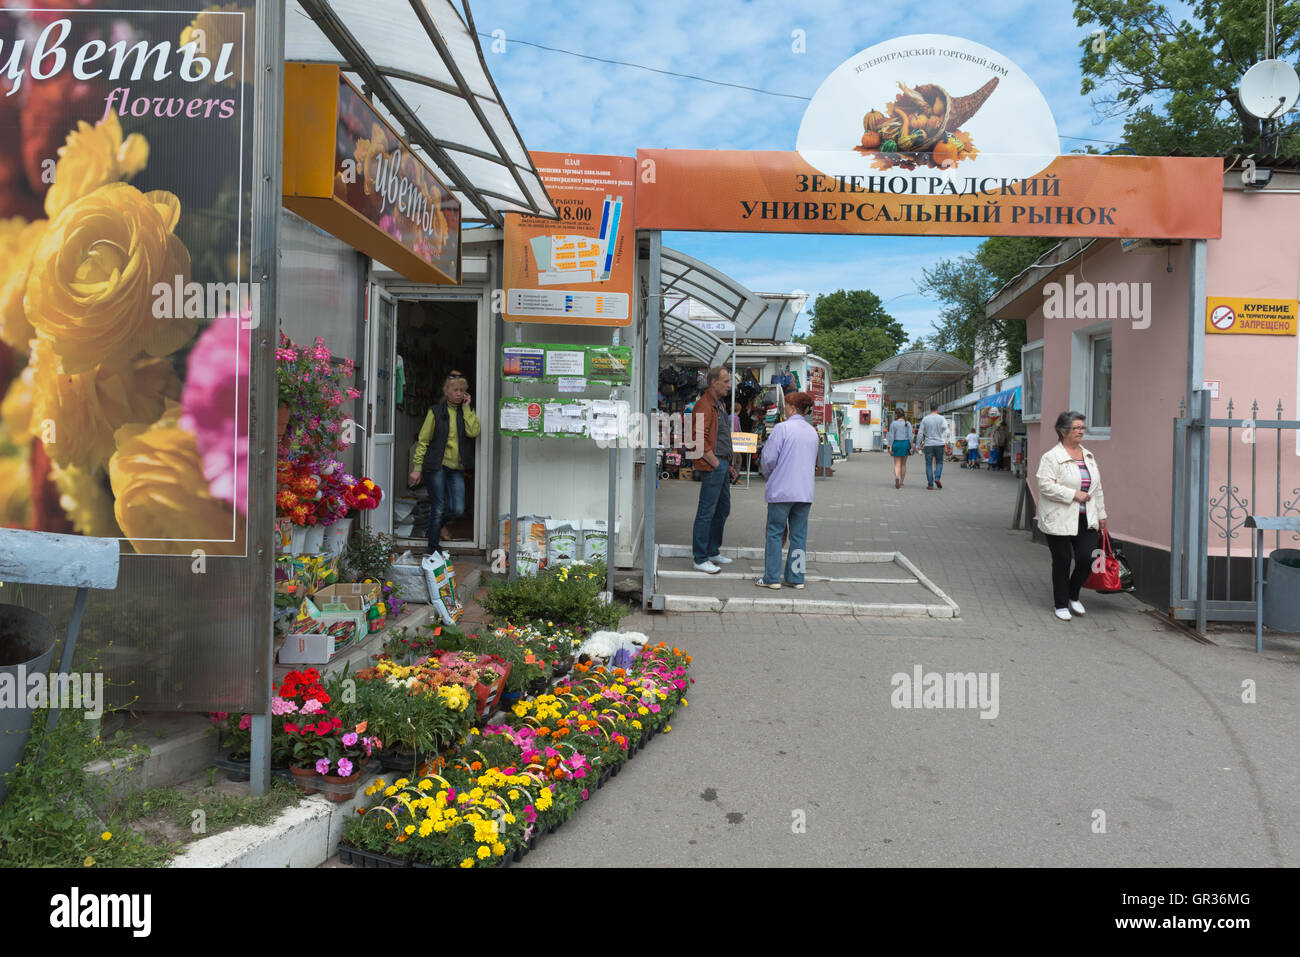 Small shopping center promoting their products,  Zelenogradsk, ex Cranz, Kaliningrad Region, Russia, Stock Photo